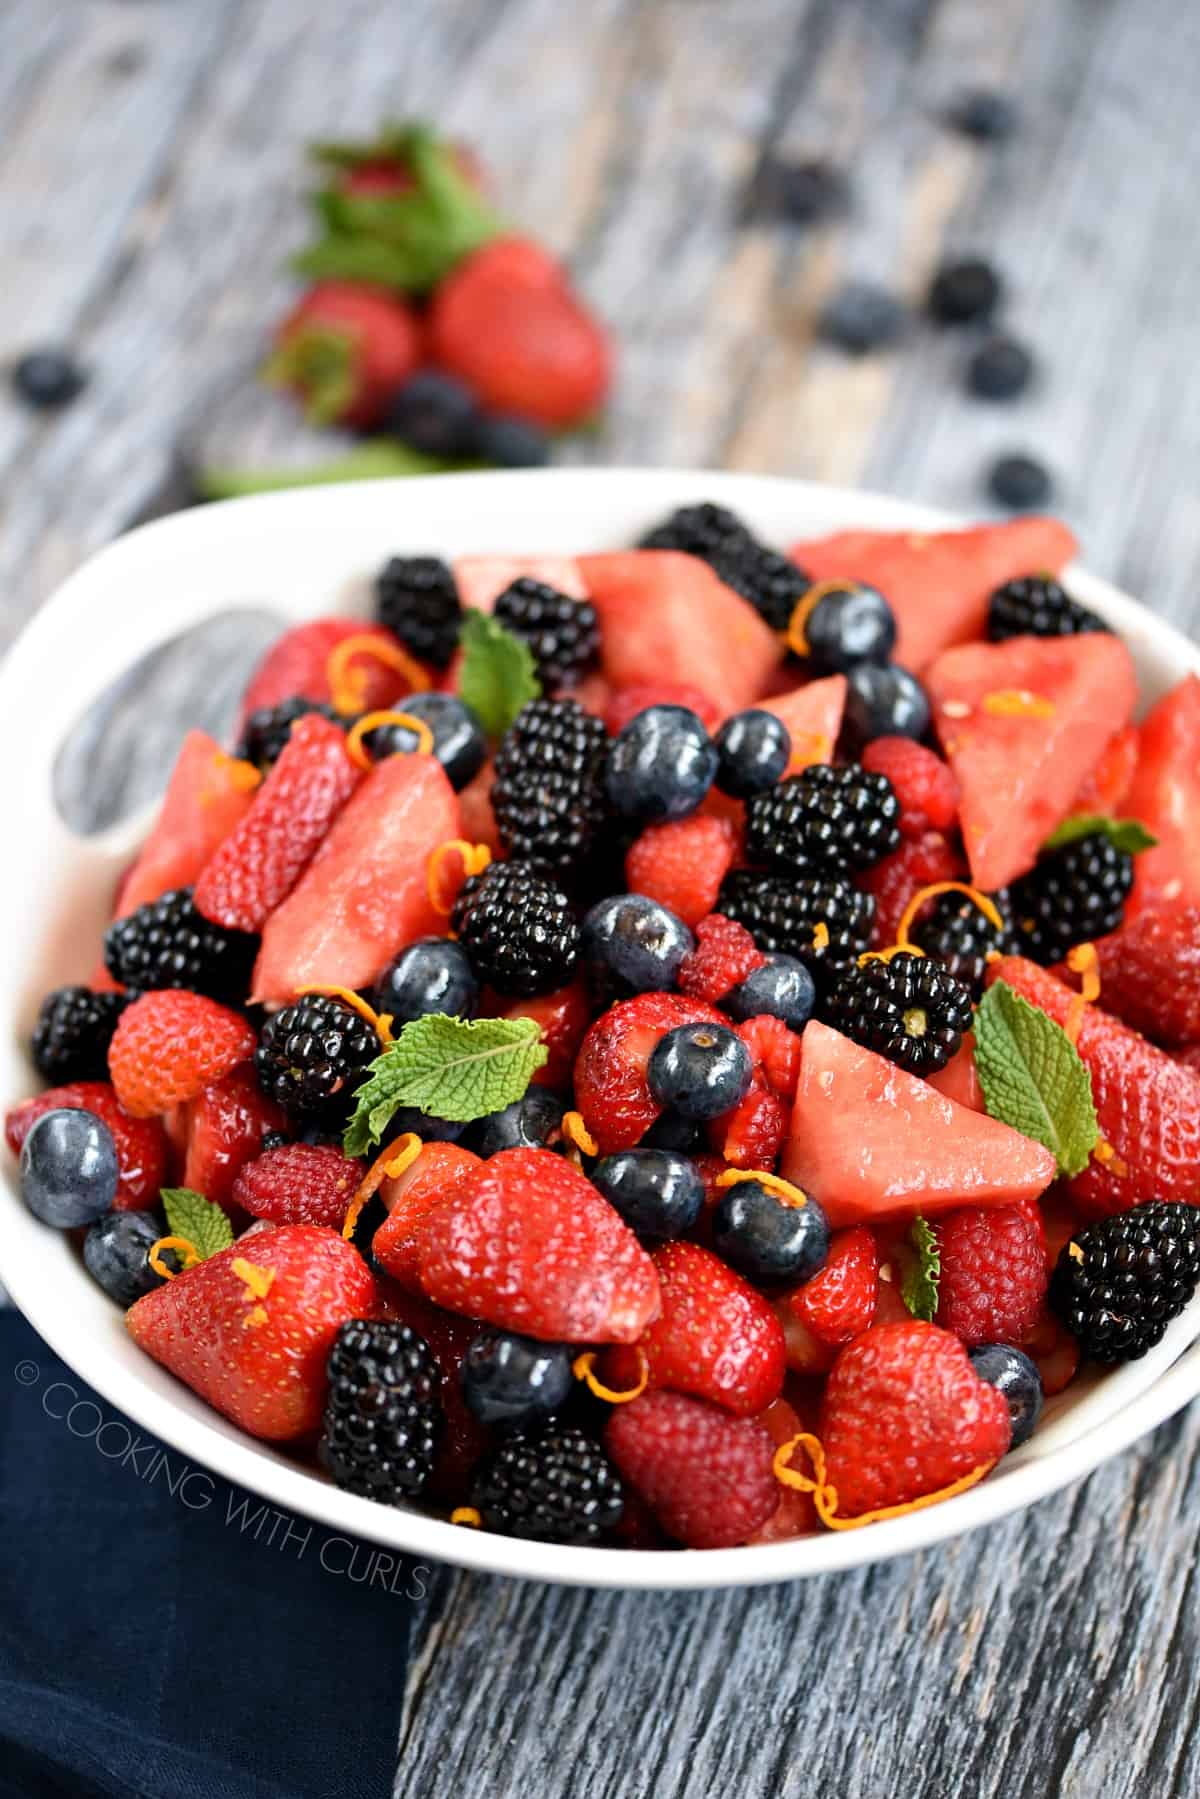 Watermelon, blackberries, blueberries and strawberries tossed together in a large white serving bowl and garnished with mint leaves.